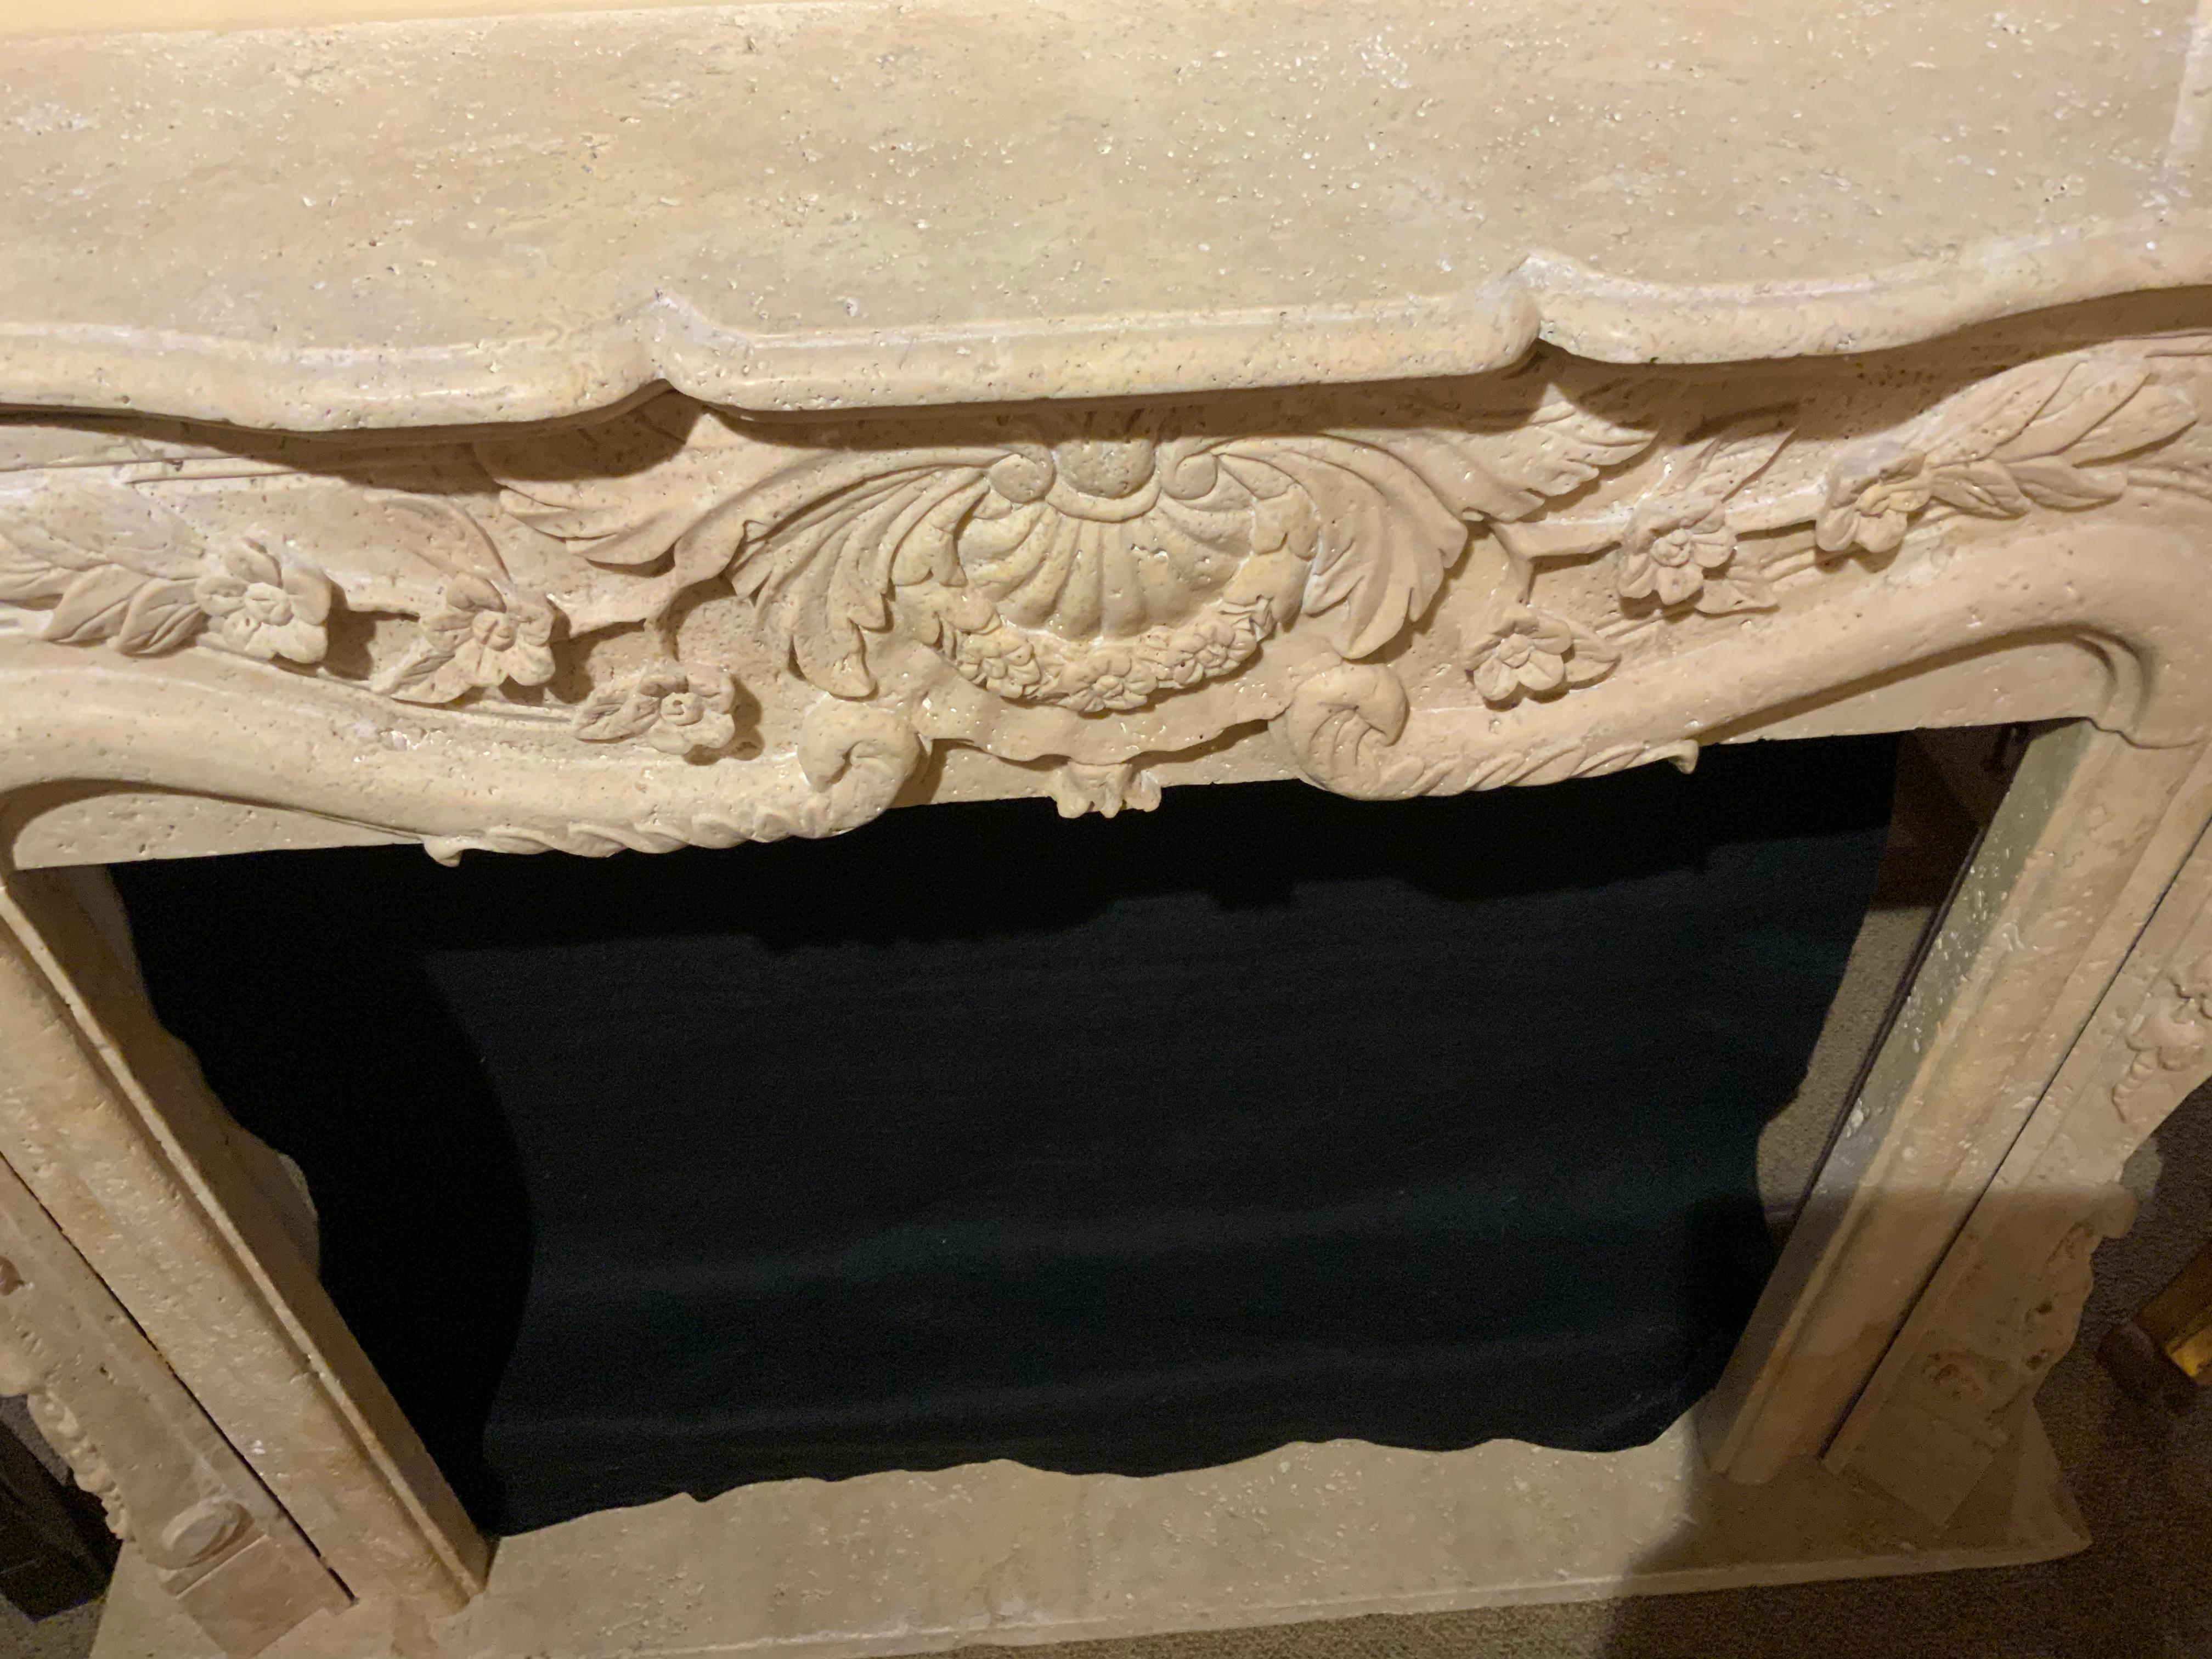 Travertine mantel with curved and carved corners, having a scalloped top edge
Center front with a shell cartouche centered with floral and foliate designs.
The corners having a graceful curved support.